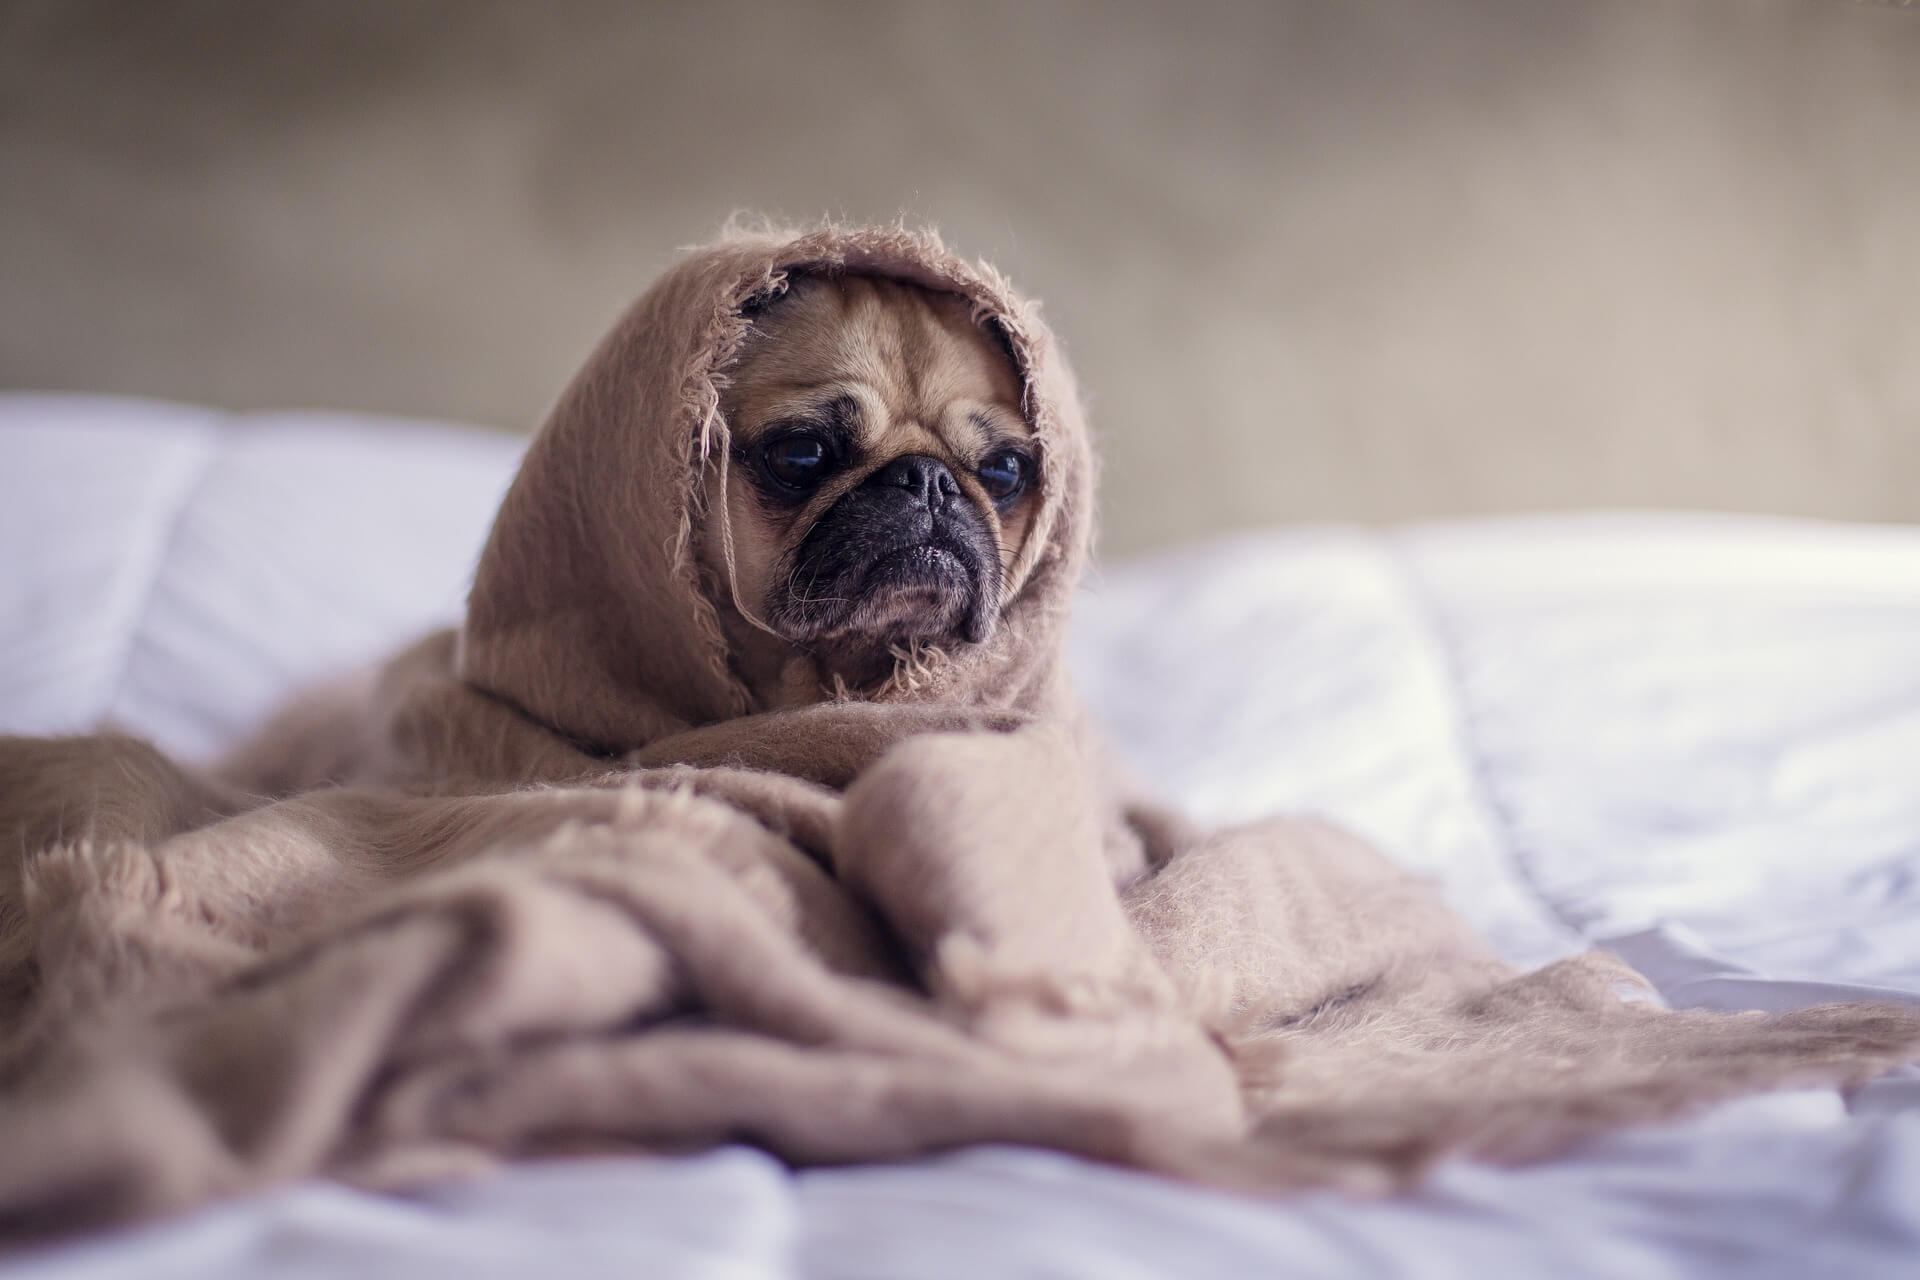 Pug in a Blanket2